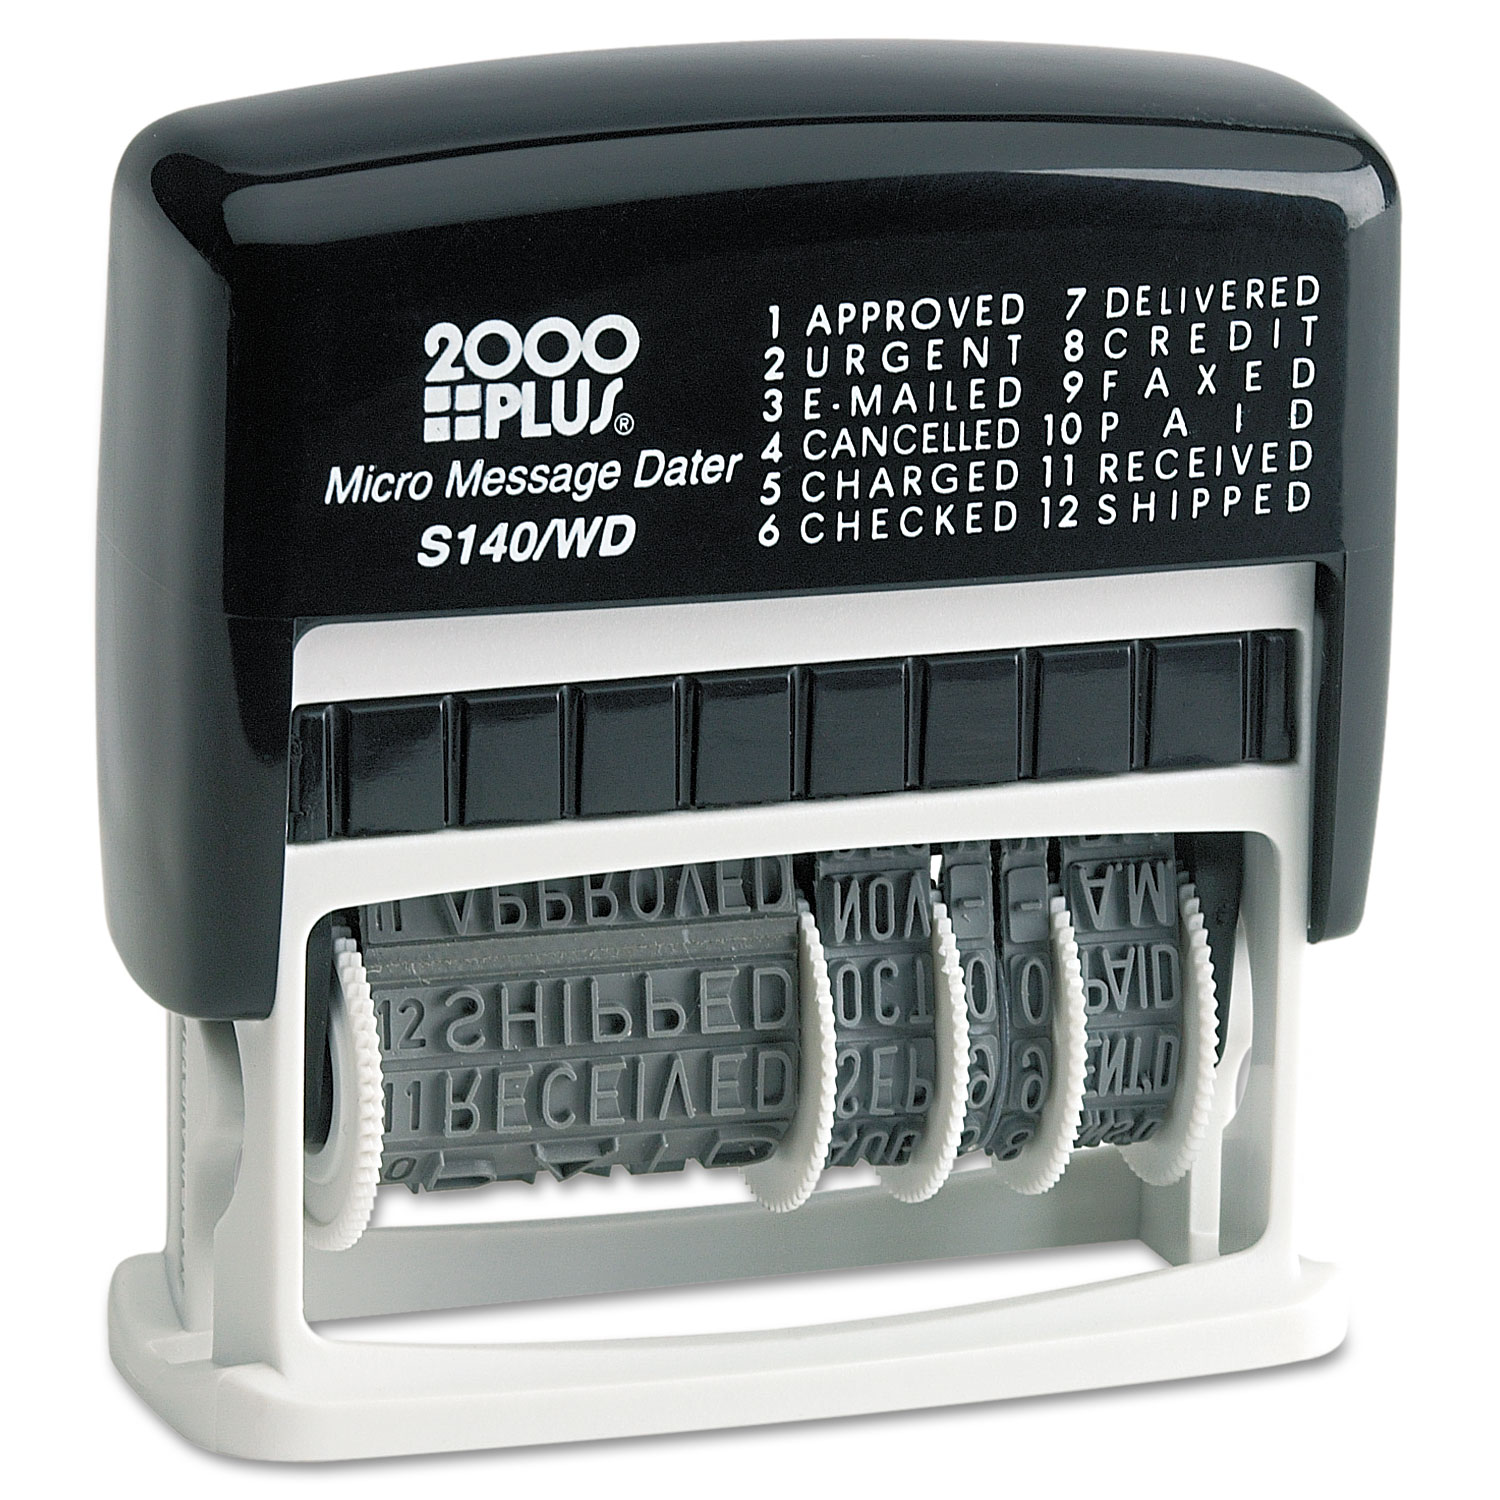  COSCO 2000PLUS 011090 Micro Message Dater, Self-Inking (COS011090) 